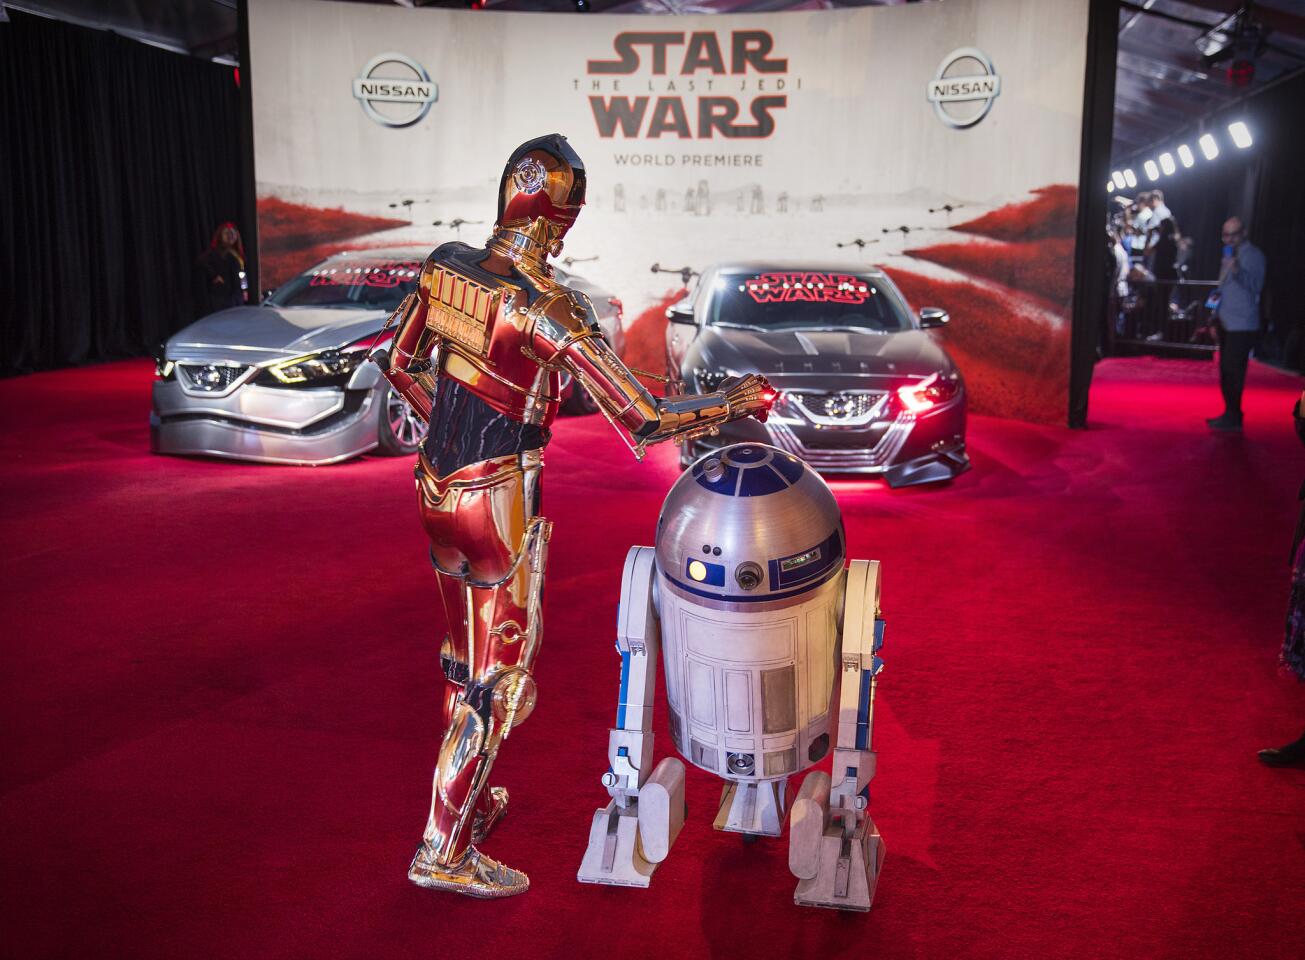 IMAGE DISTRIBUTED FOR NISSAN - Andy Serkis arrives at the World Premiere of Stars Wars The Last Jedi where film partner Nissan showcased their interpretation of character vehicles on Saturday, Dec. 9, 2017 in Los Angeles. (Photo by Colin Young-Wolff/Invision for Nissan/AP Images)